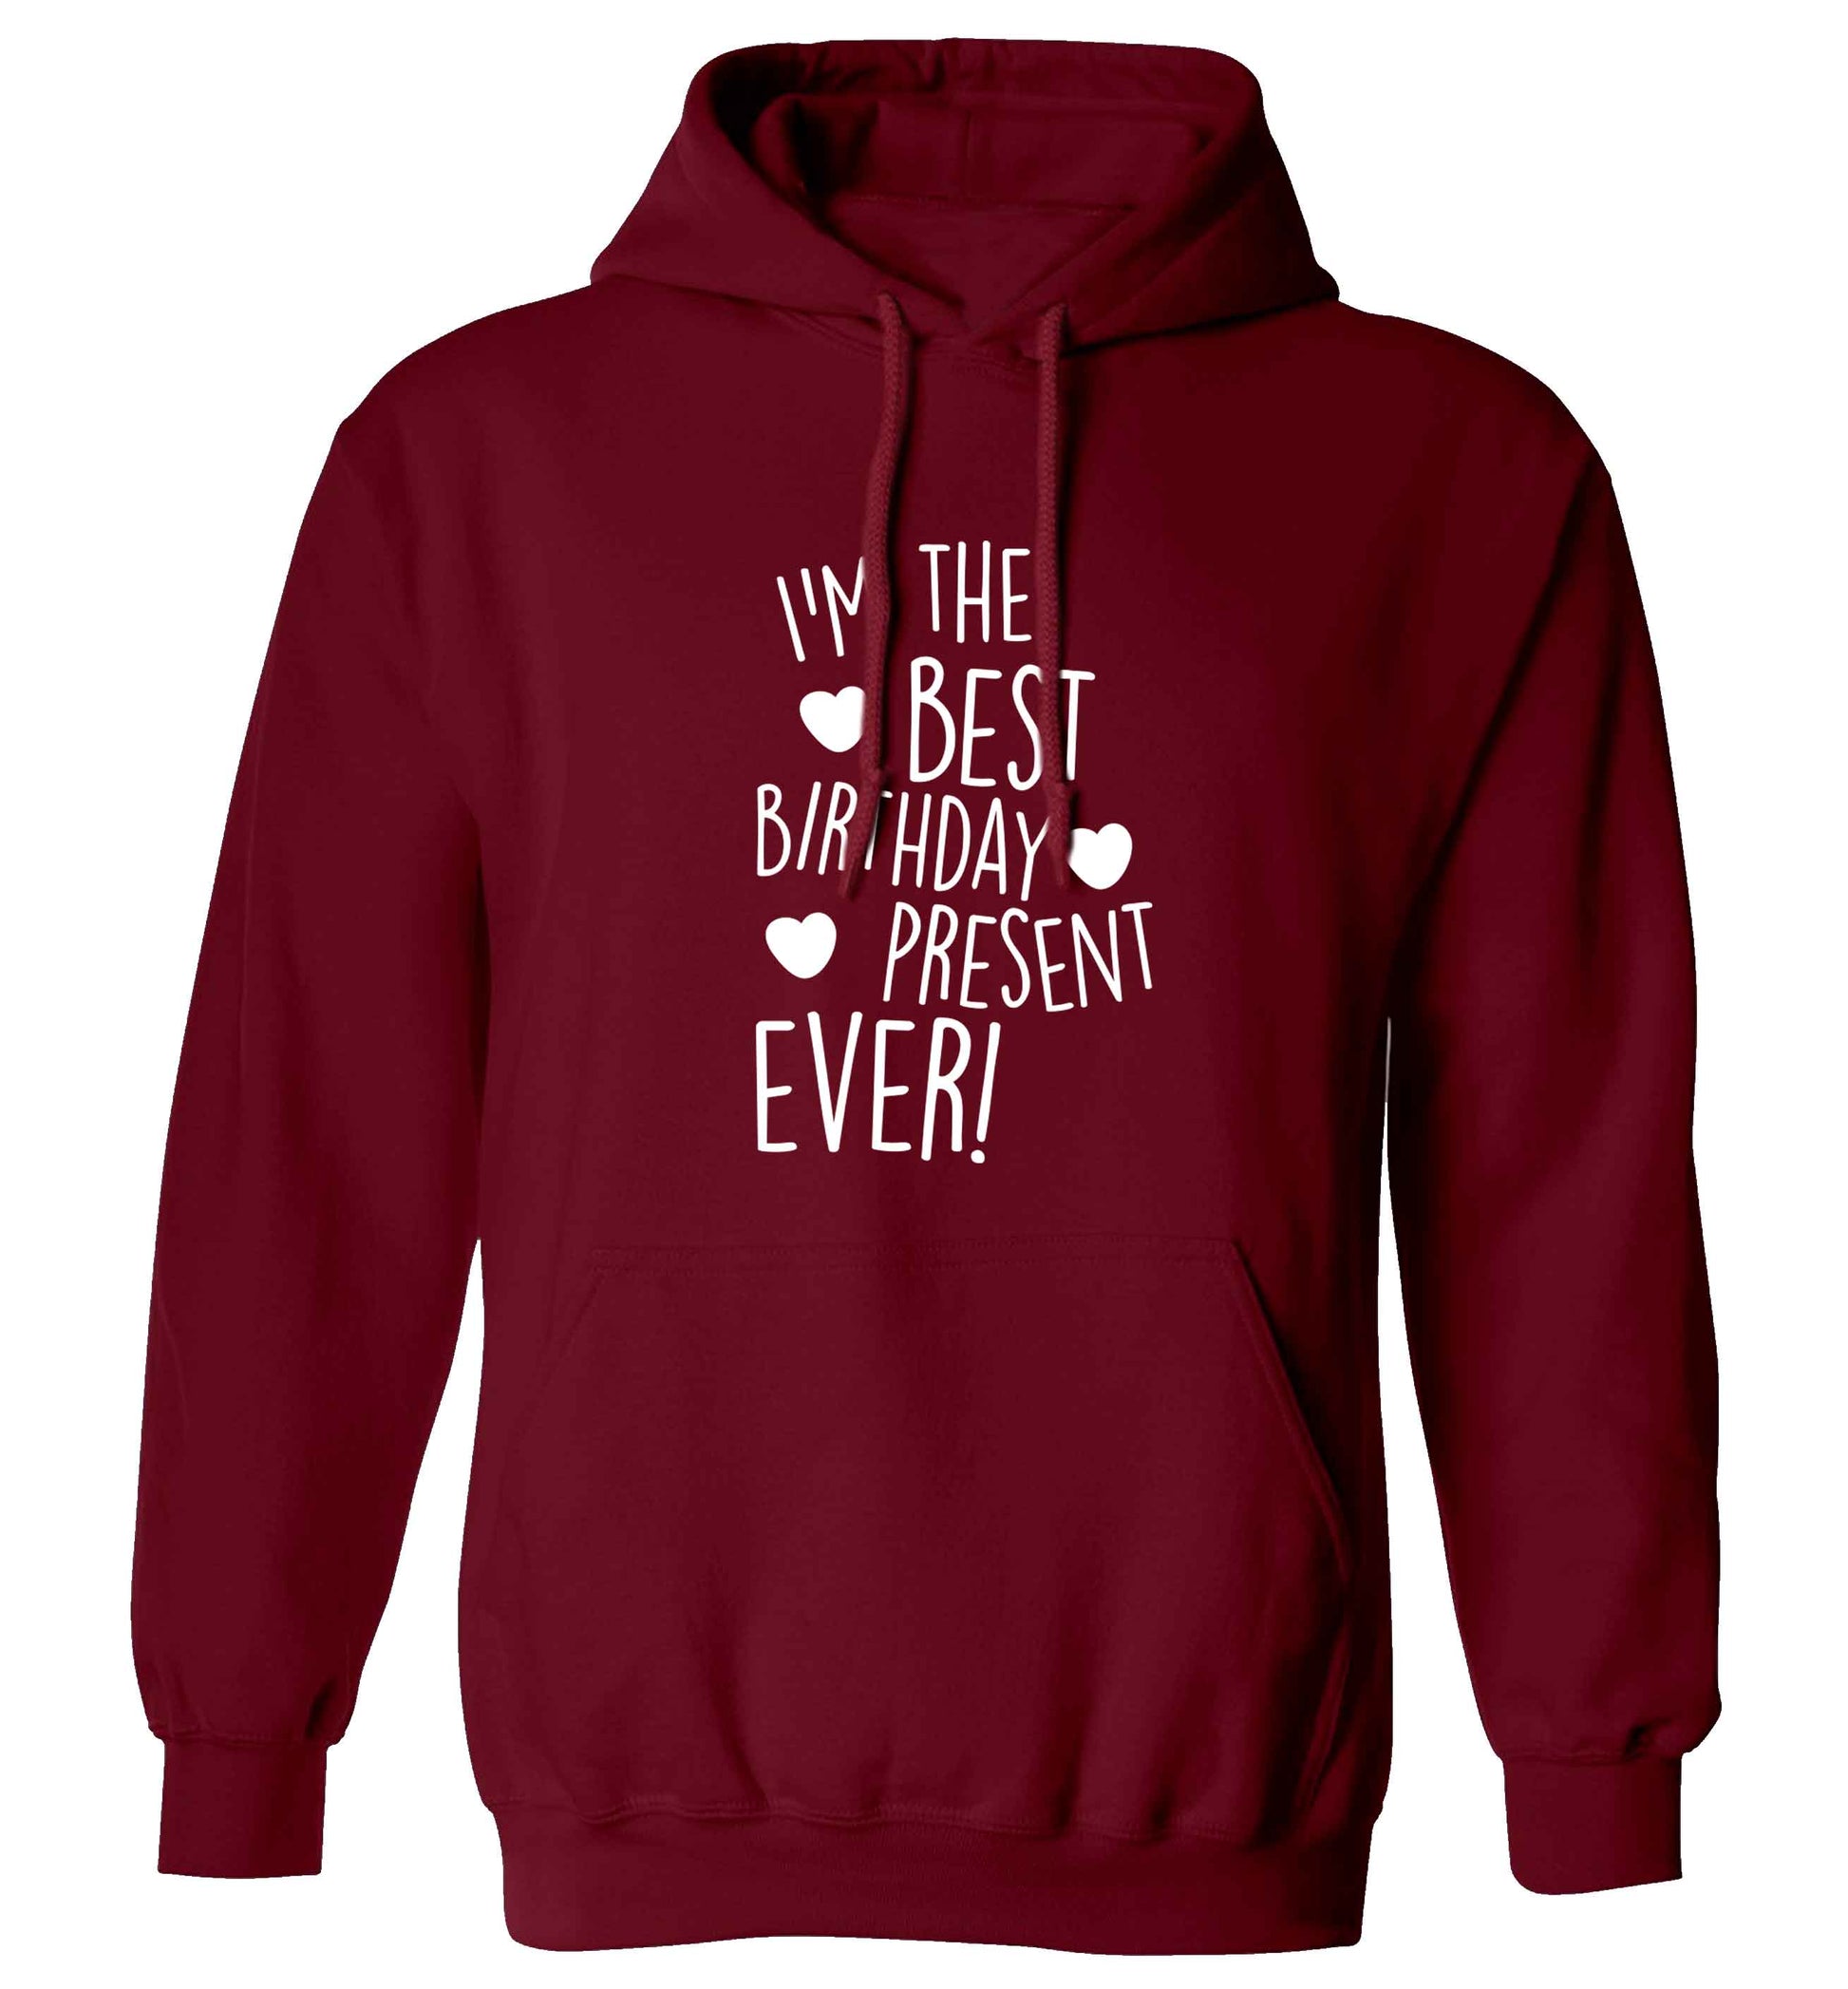 I'm the best birthday present ever adults unisex maroon hoodie 2XL